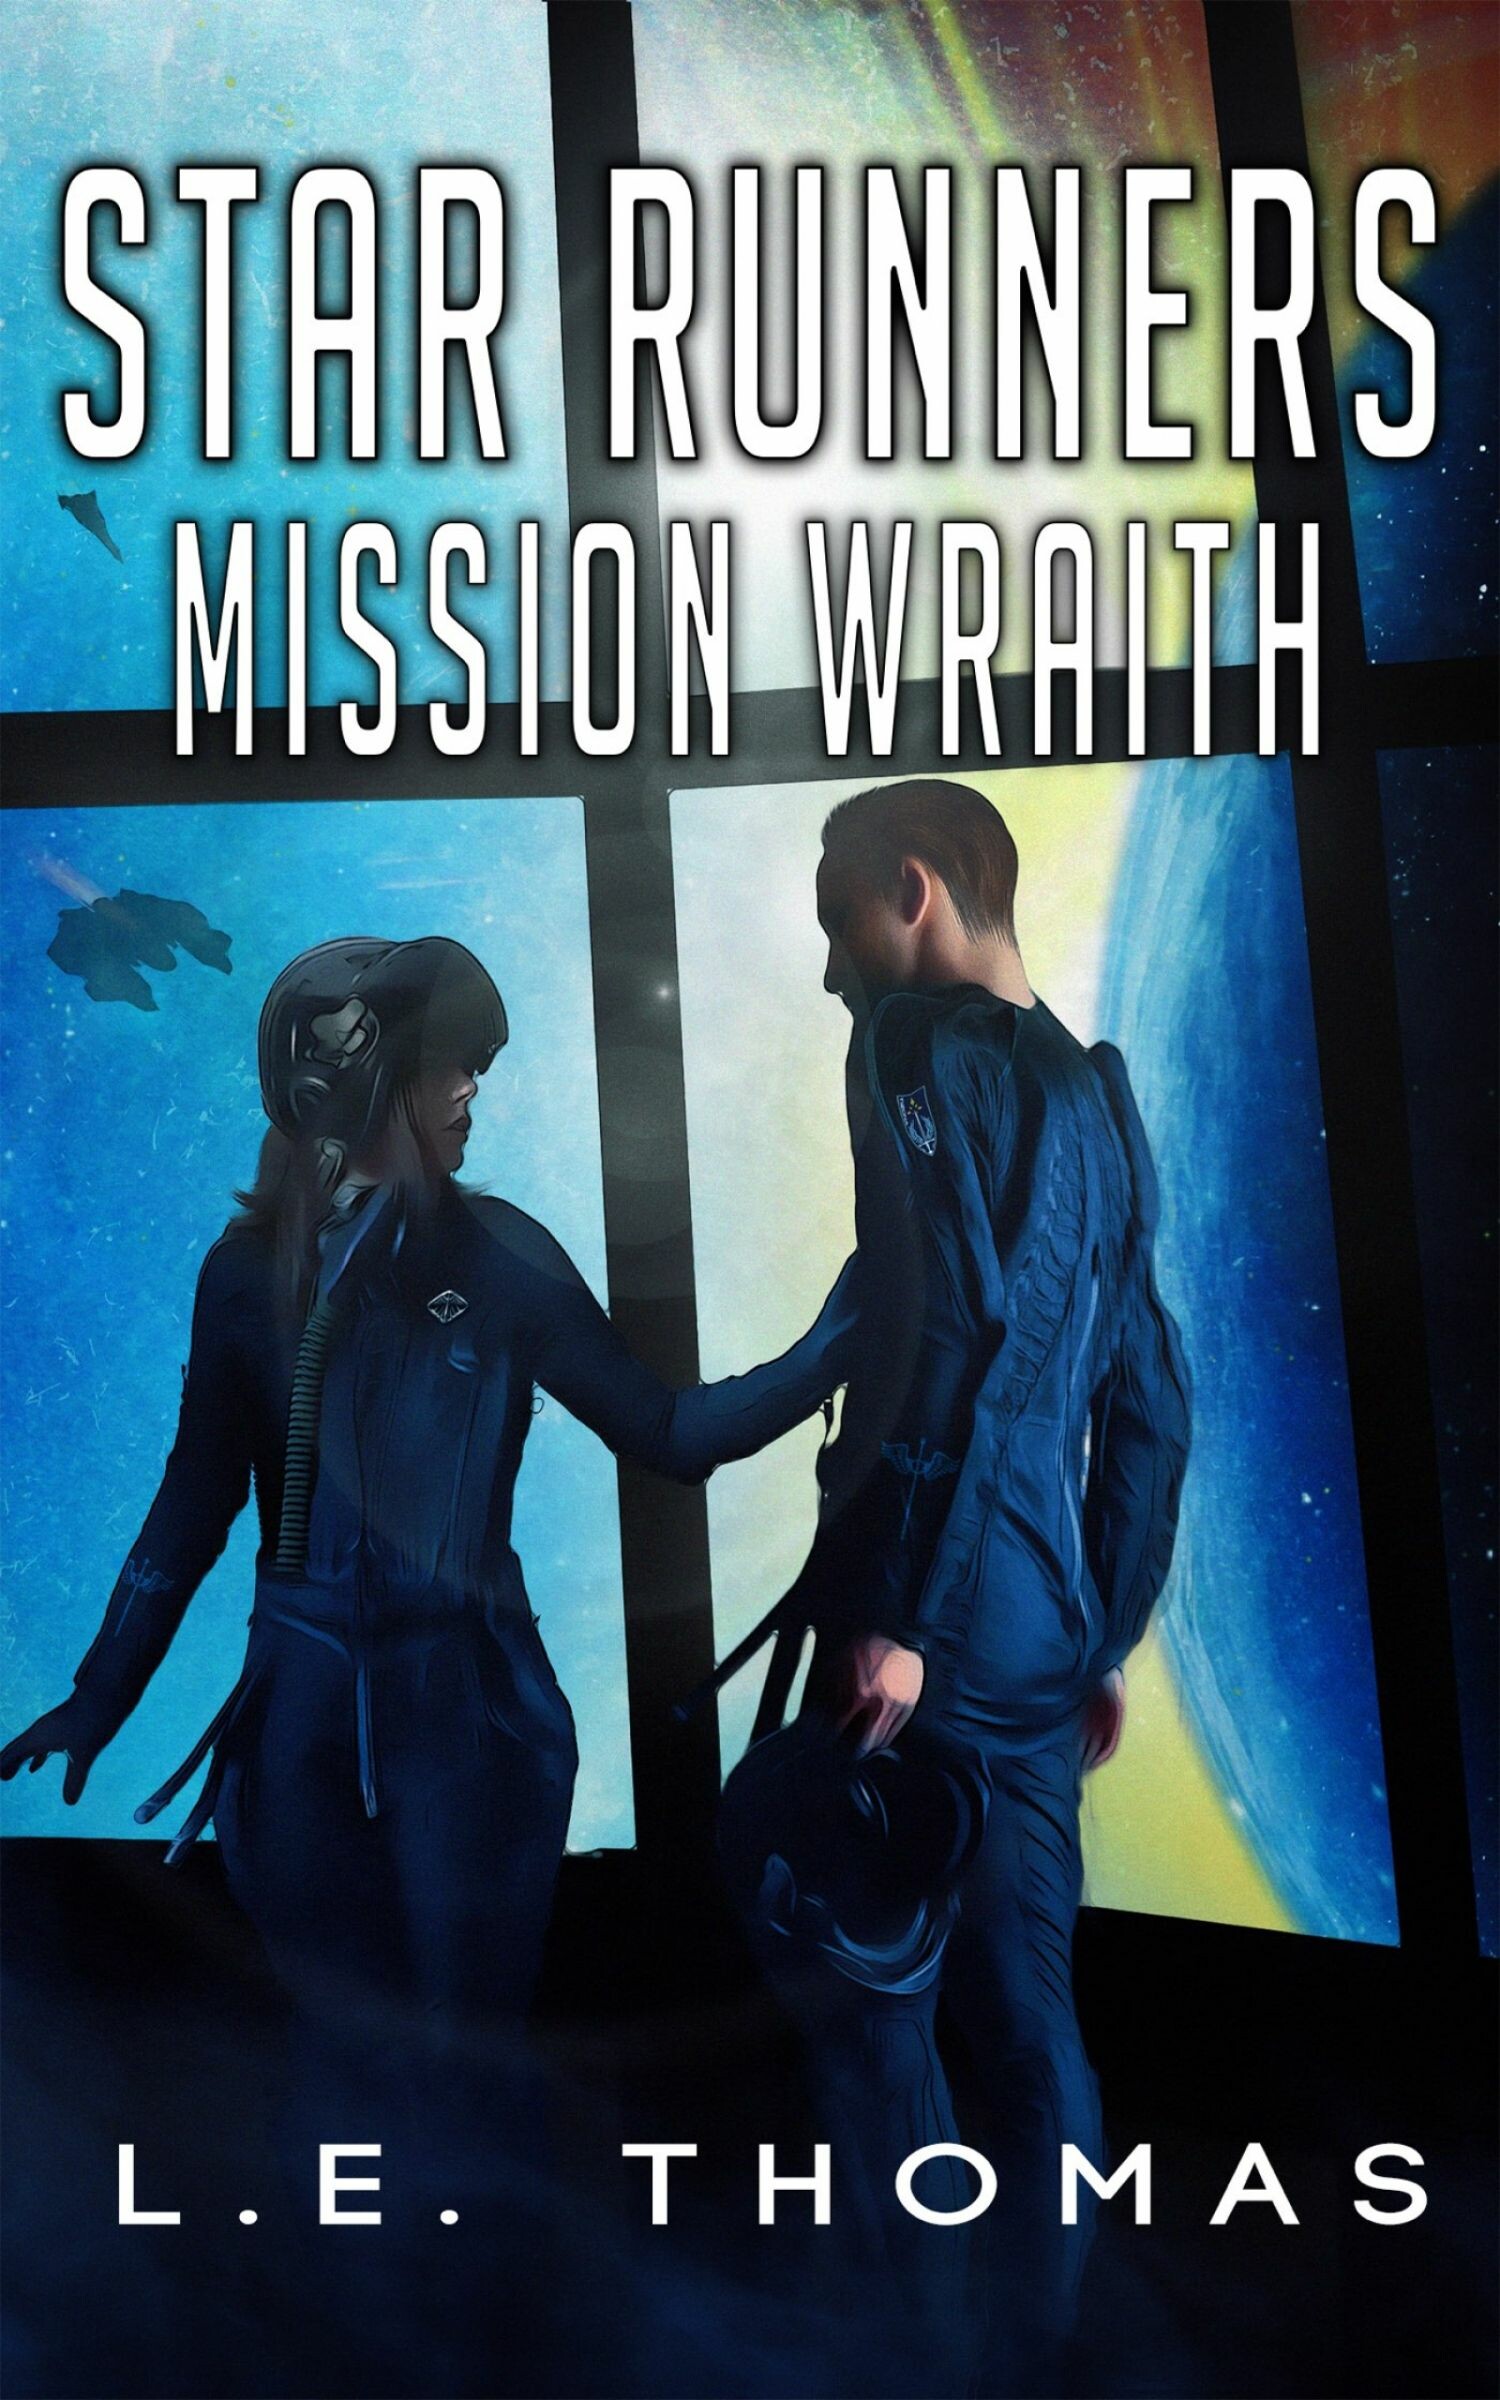 Star Runners: Mission Wraith